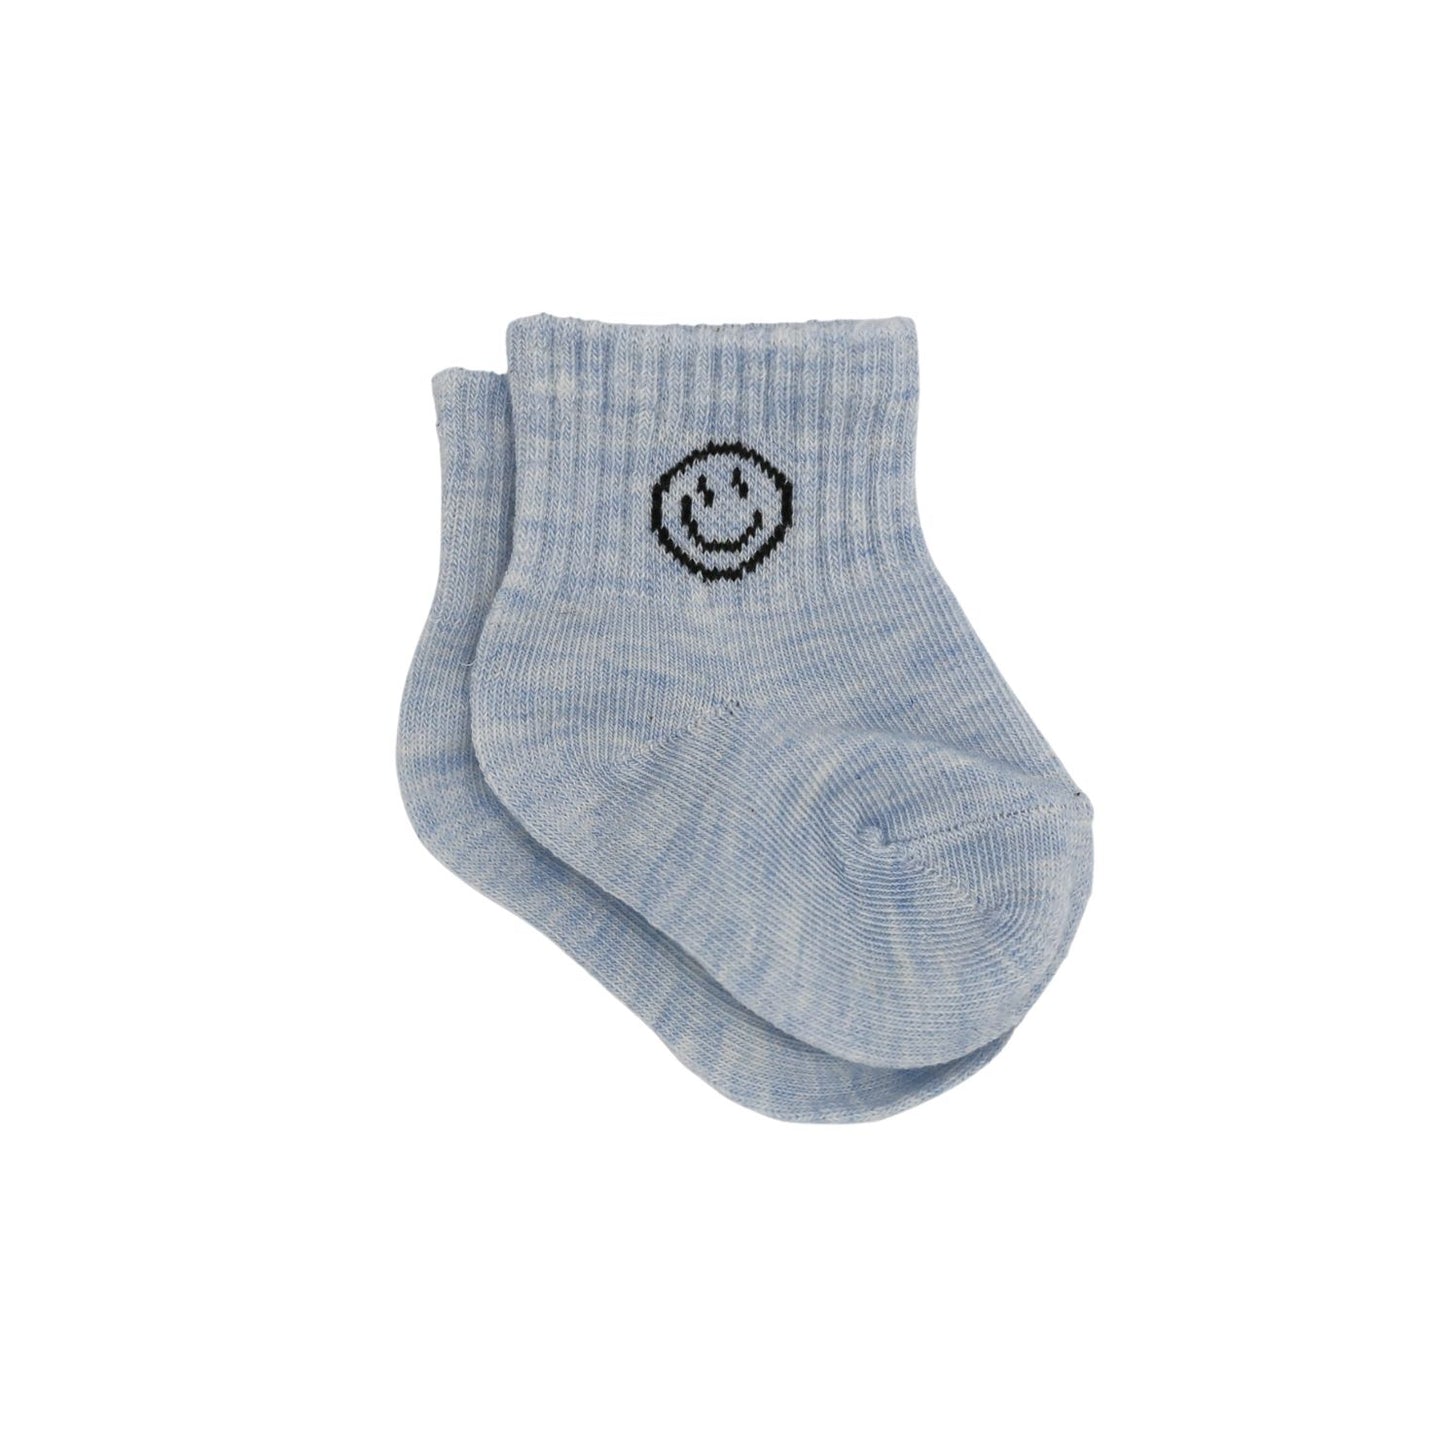 The Baby Cubby Smiling Face Socks - Light Blue